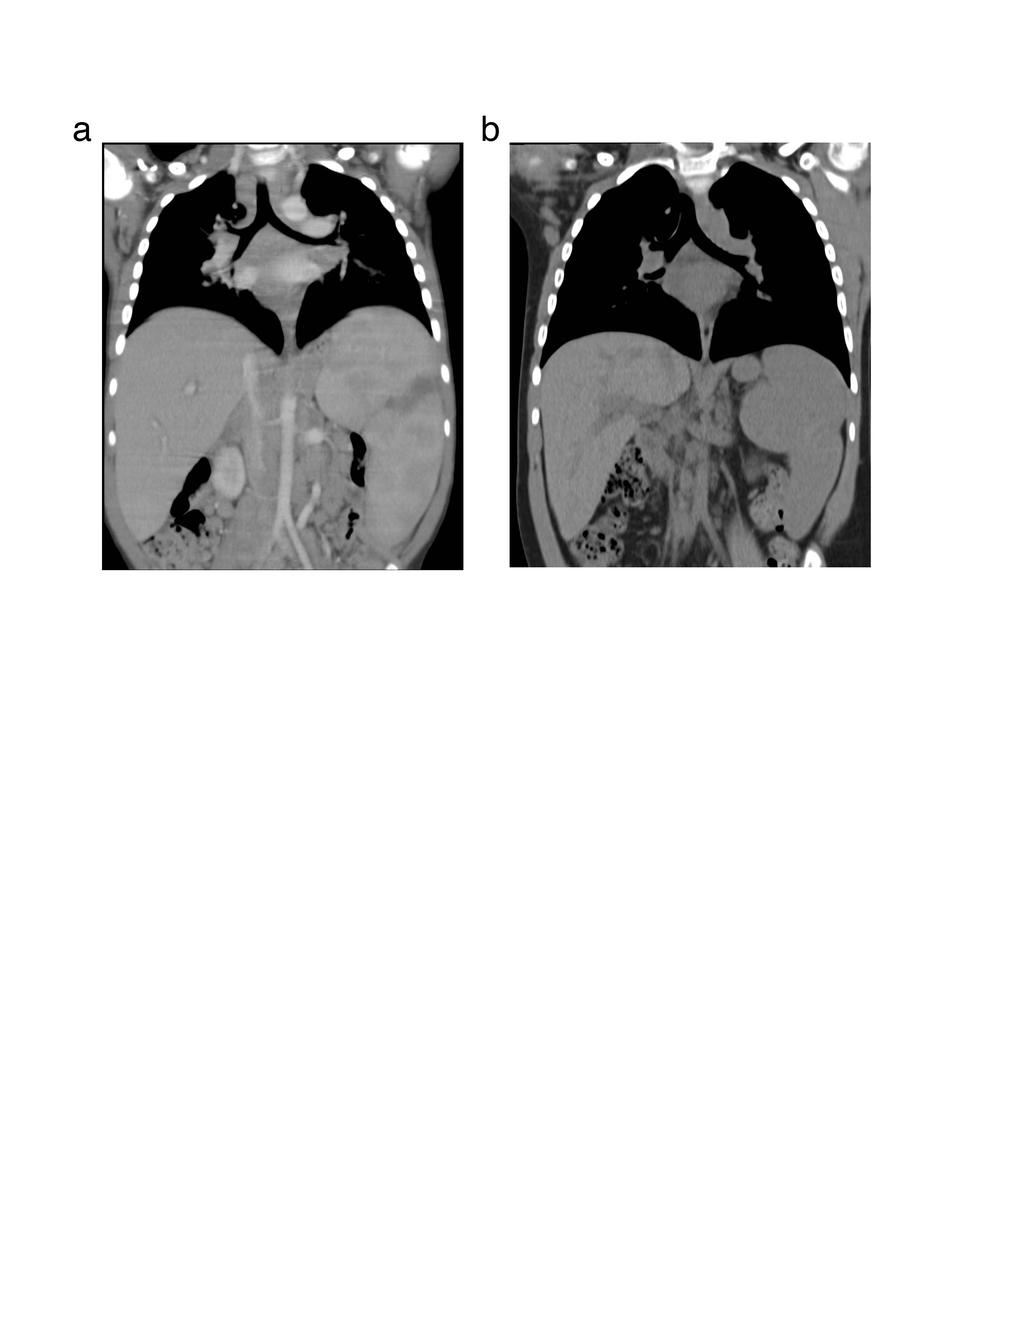 Supplementary Figure 9. CT images comparing hepatosplenomegaly and lymphadenopathy in patient A.1 before and after treatment with rapamycin.